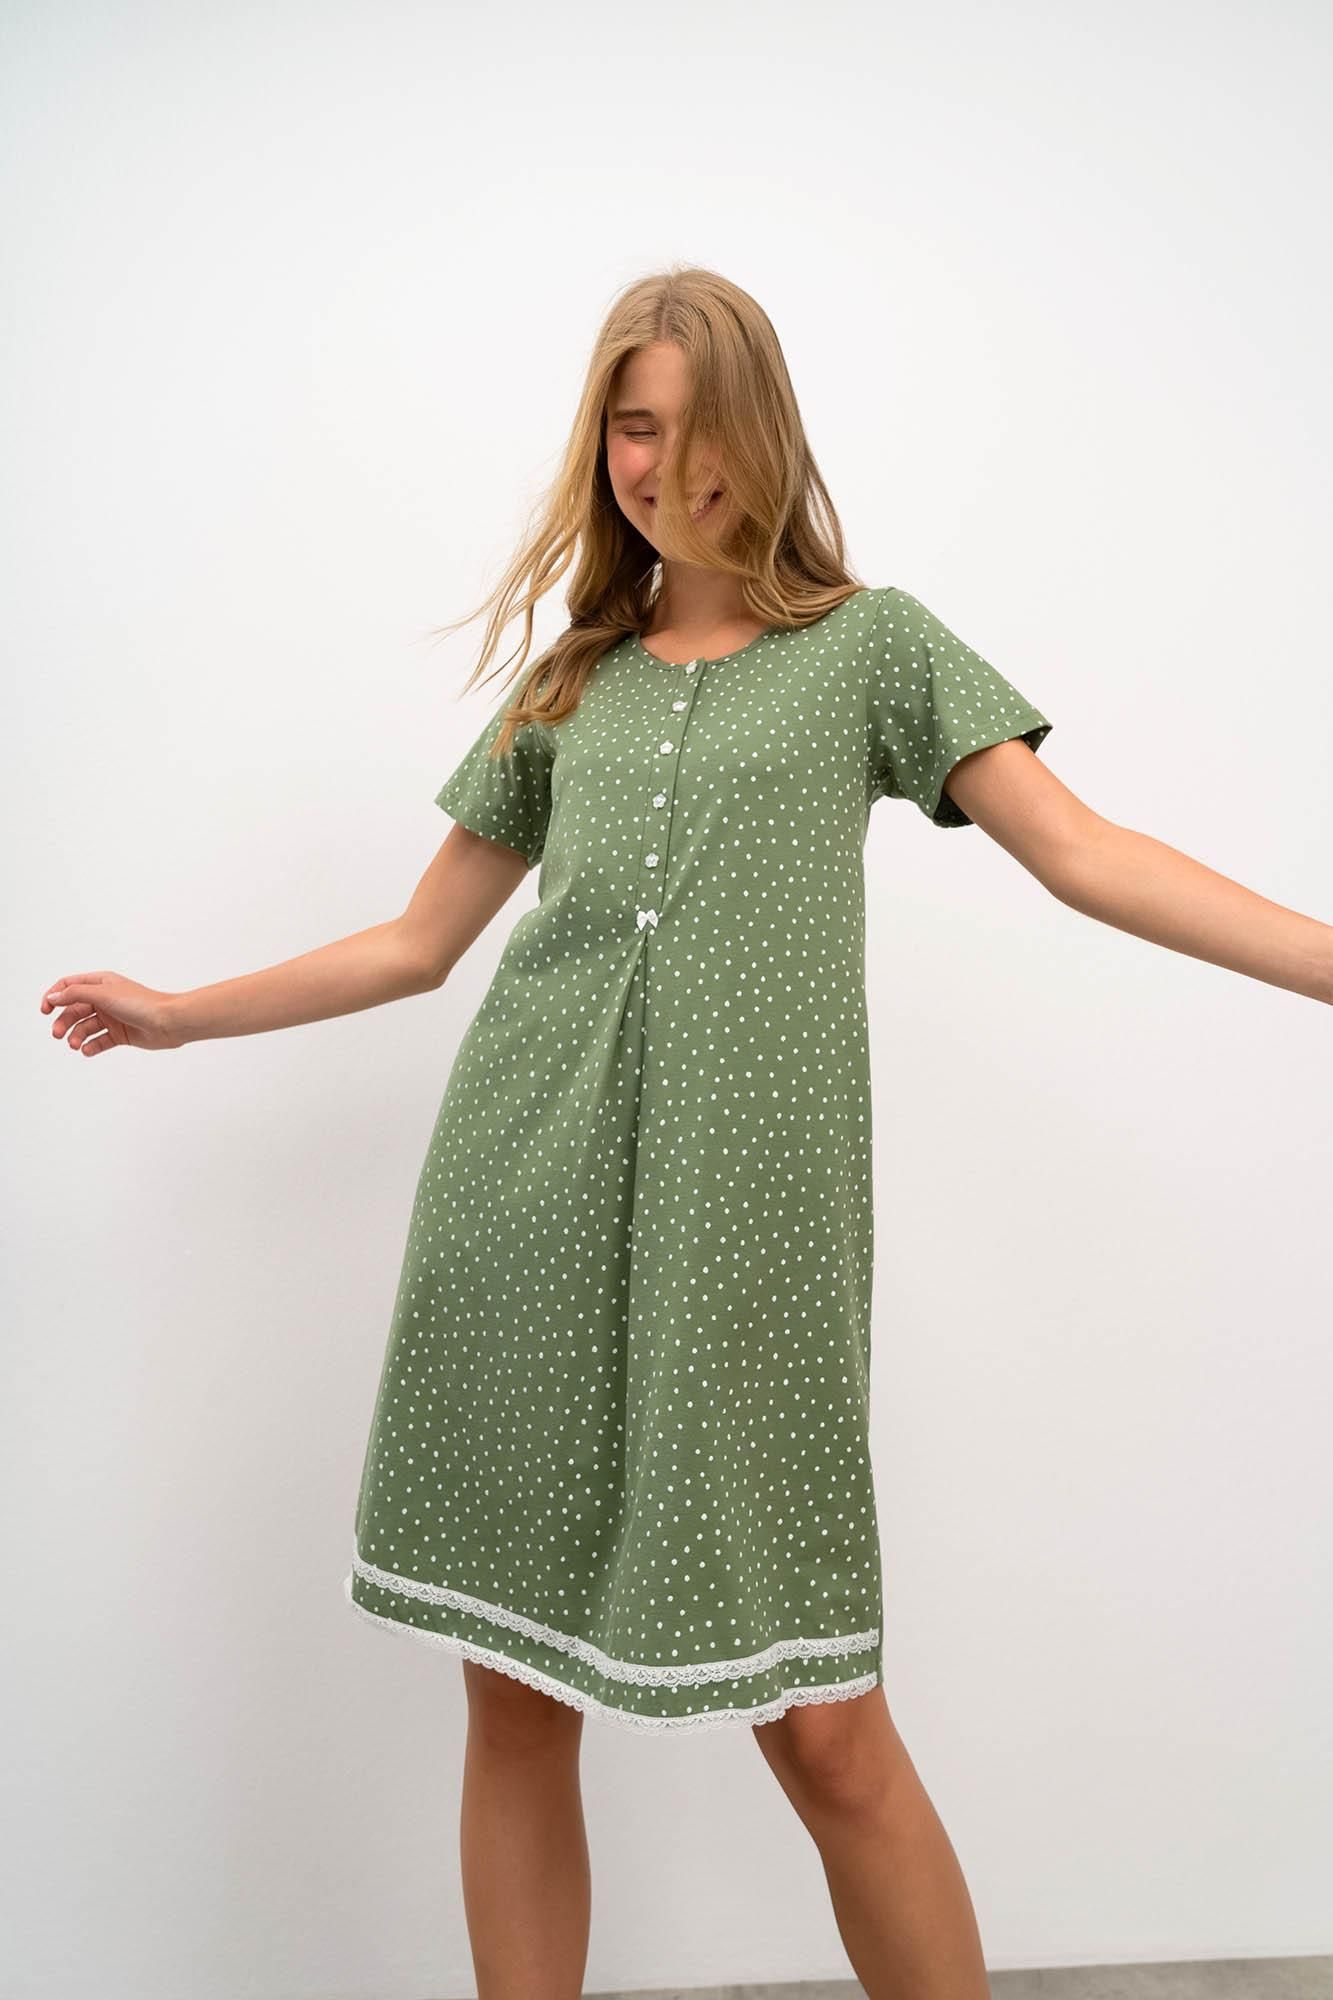 Short Sleeve Nightgown with Placket